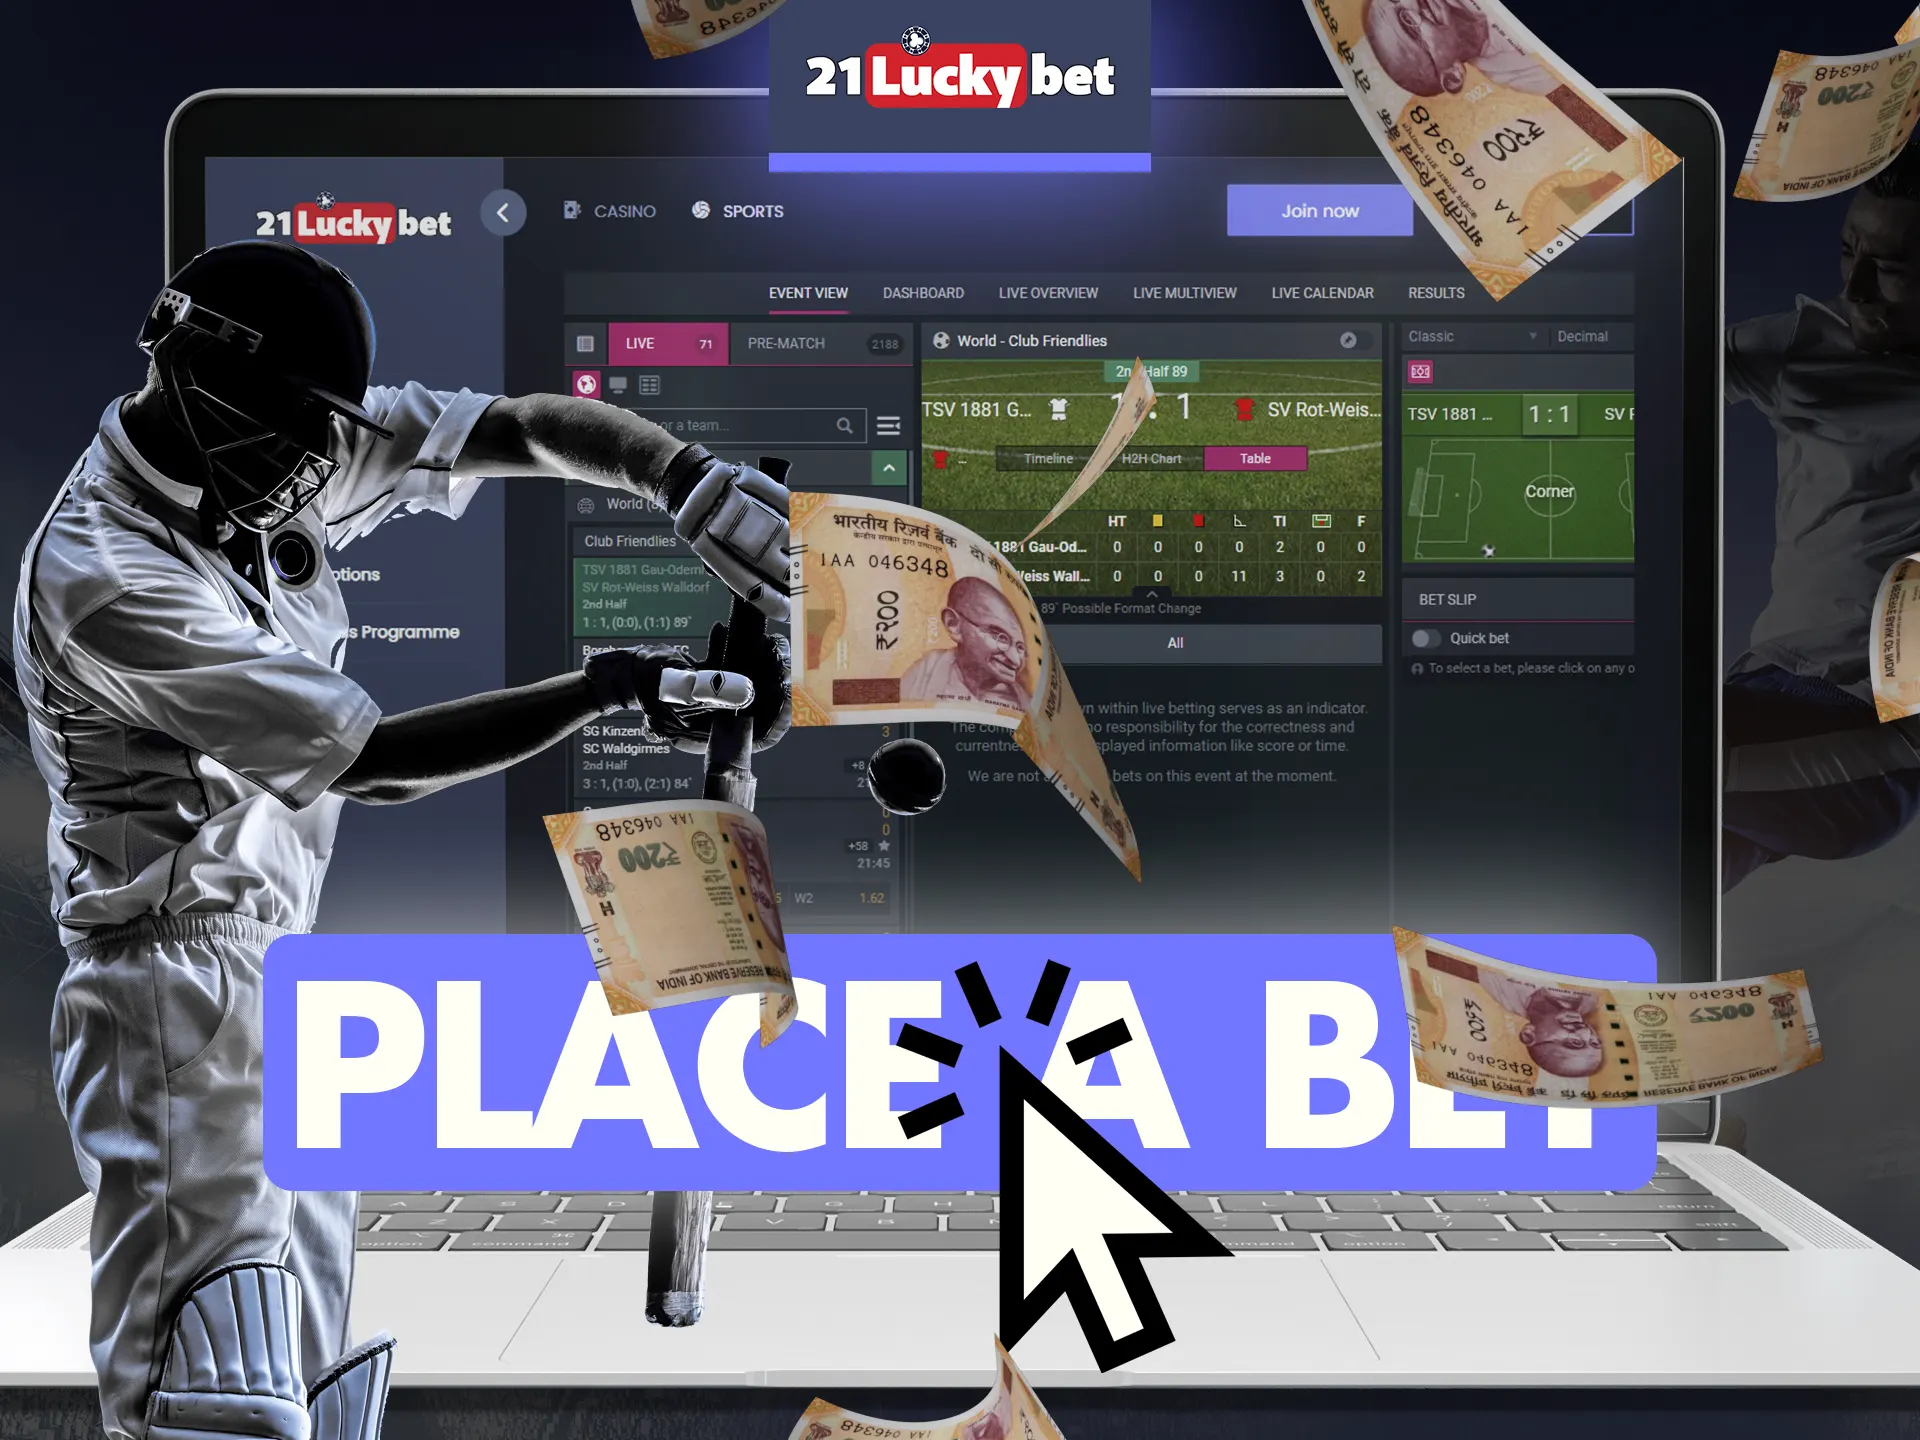 With these instructions, place your first bet at 21luckybet easily.